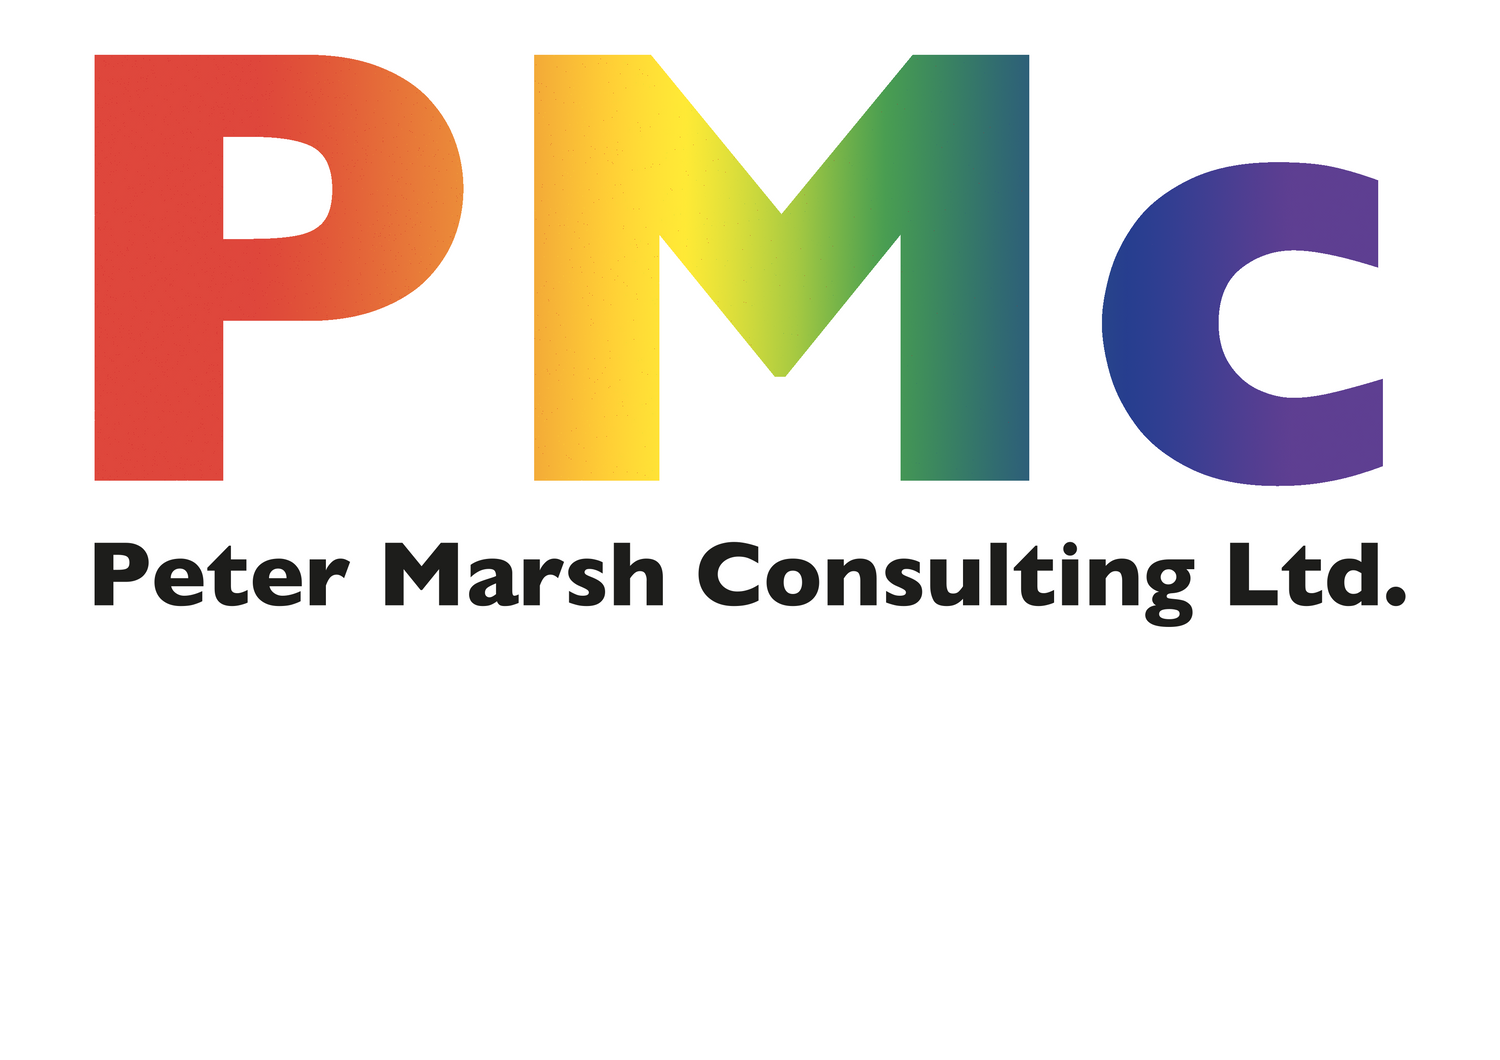 Peter Marsh Consulting